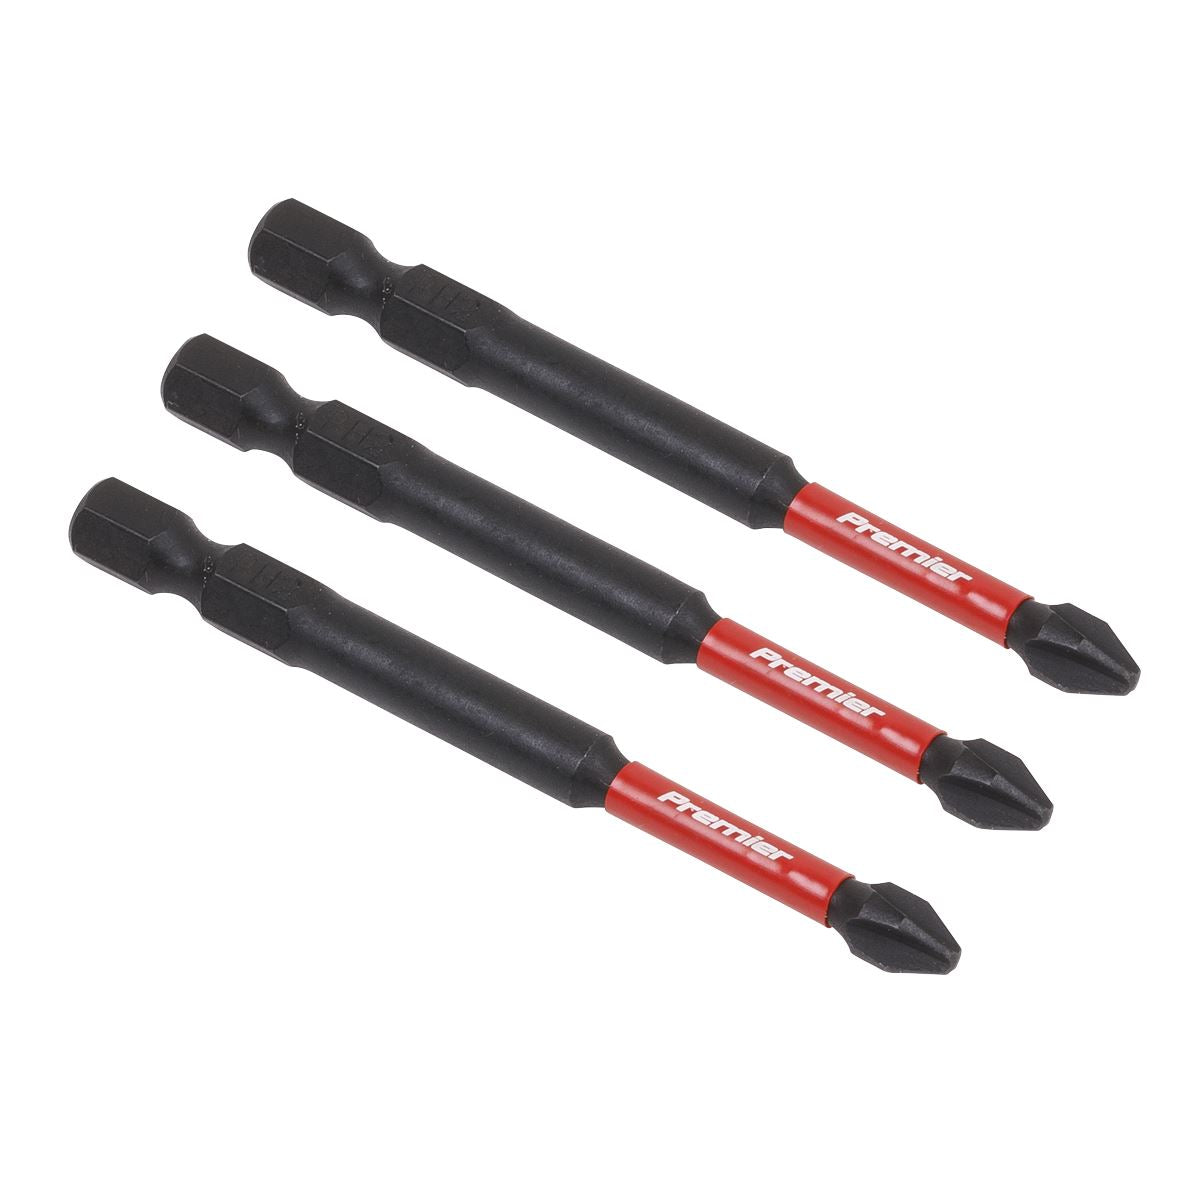 Sealey Premier Phillips #2 Impact Power Tool Bits 75mm - 3pc